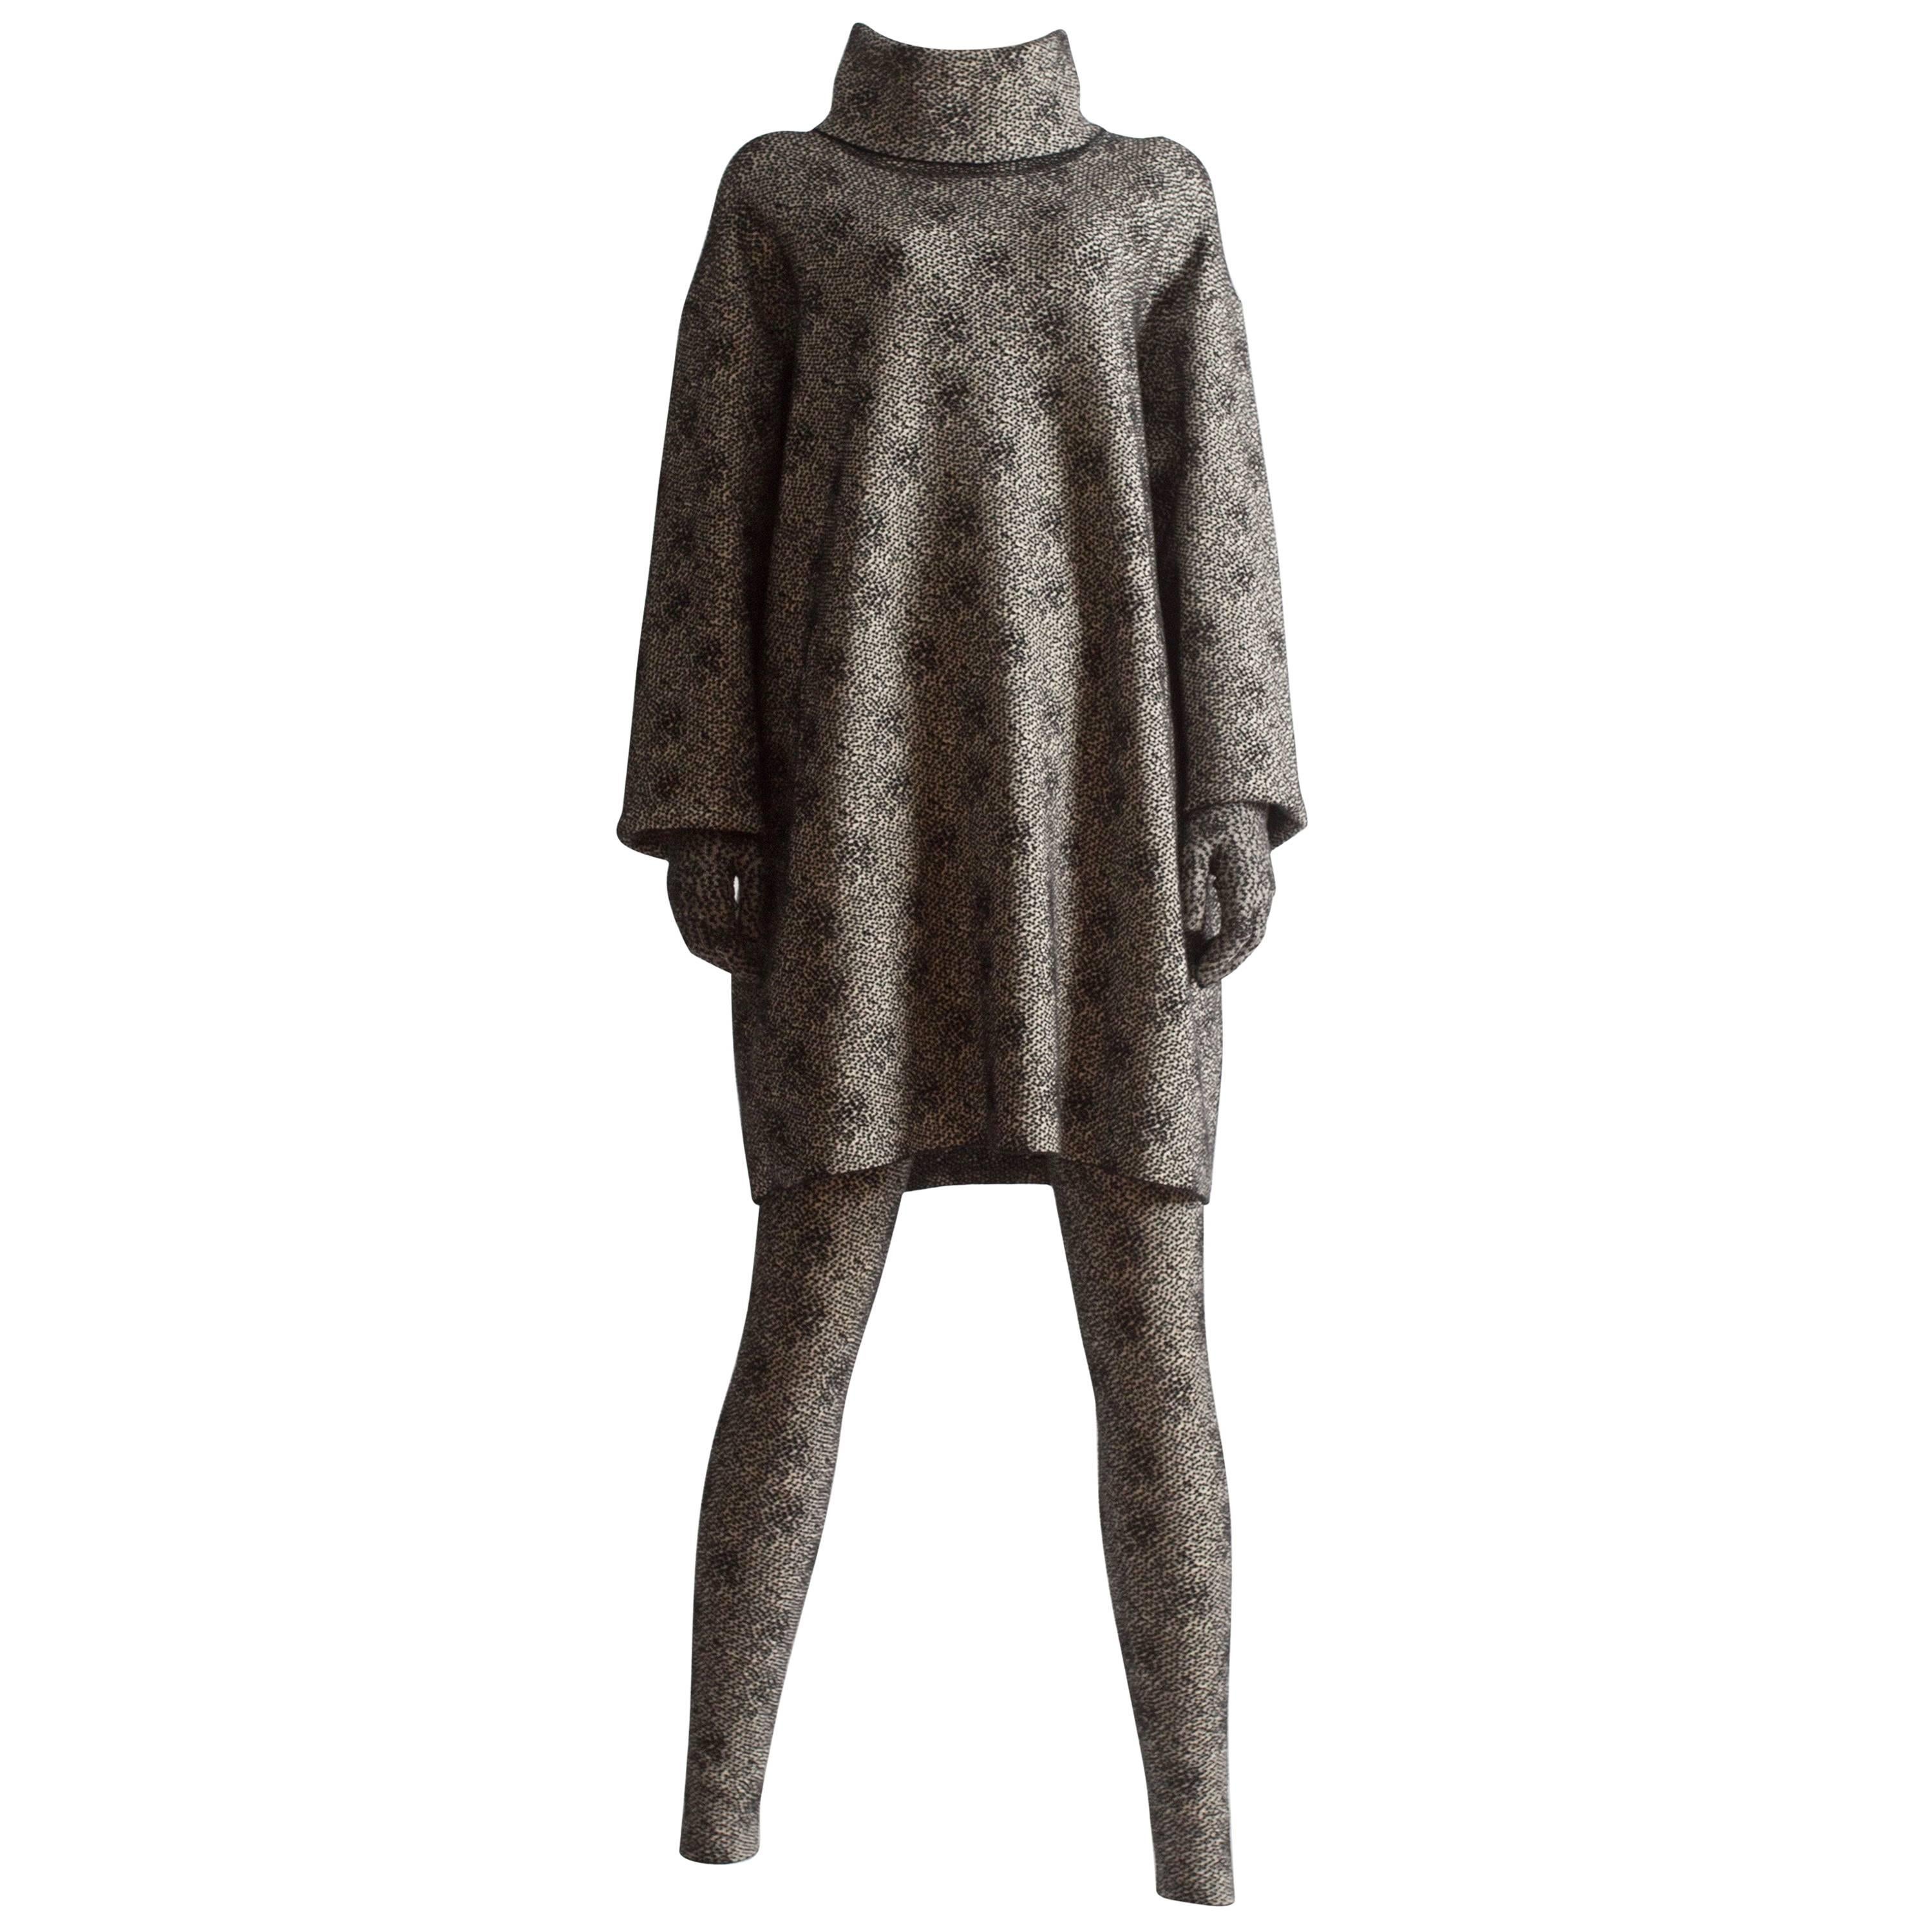 Alaia knitted sweater dress, leggings and gloves ensemble 